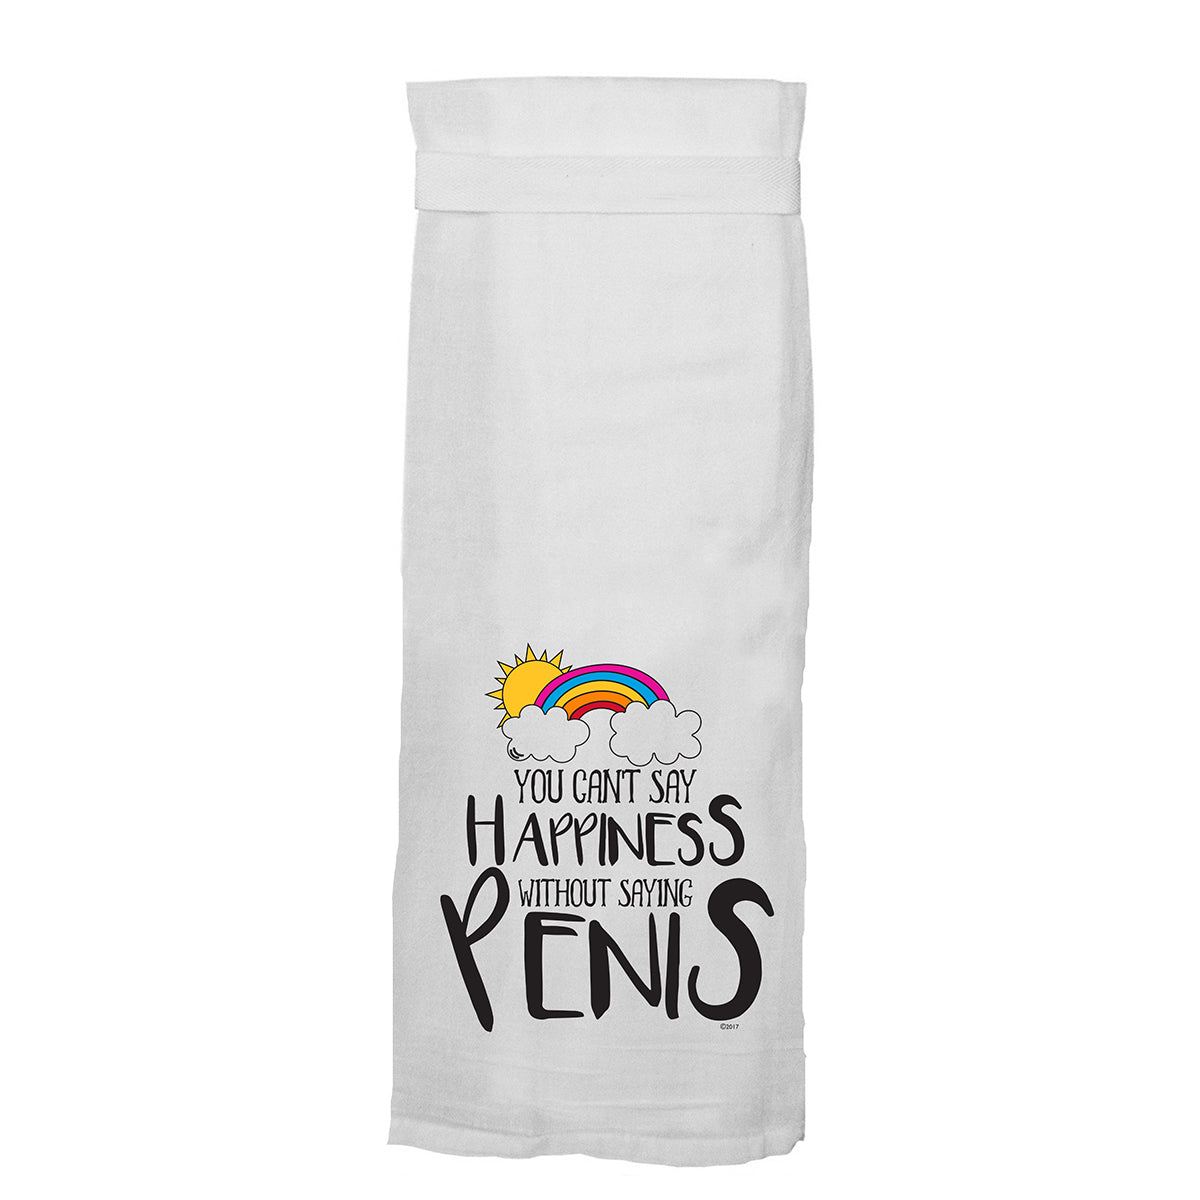 Twisted Wares You Can't Say Happiness Saying Penis Flour Towel